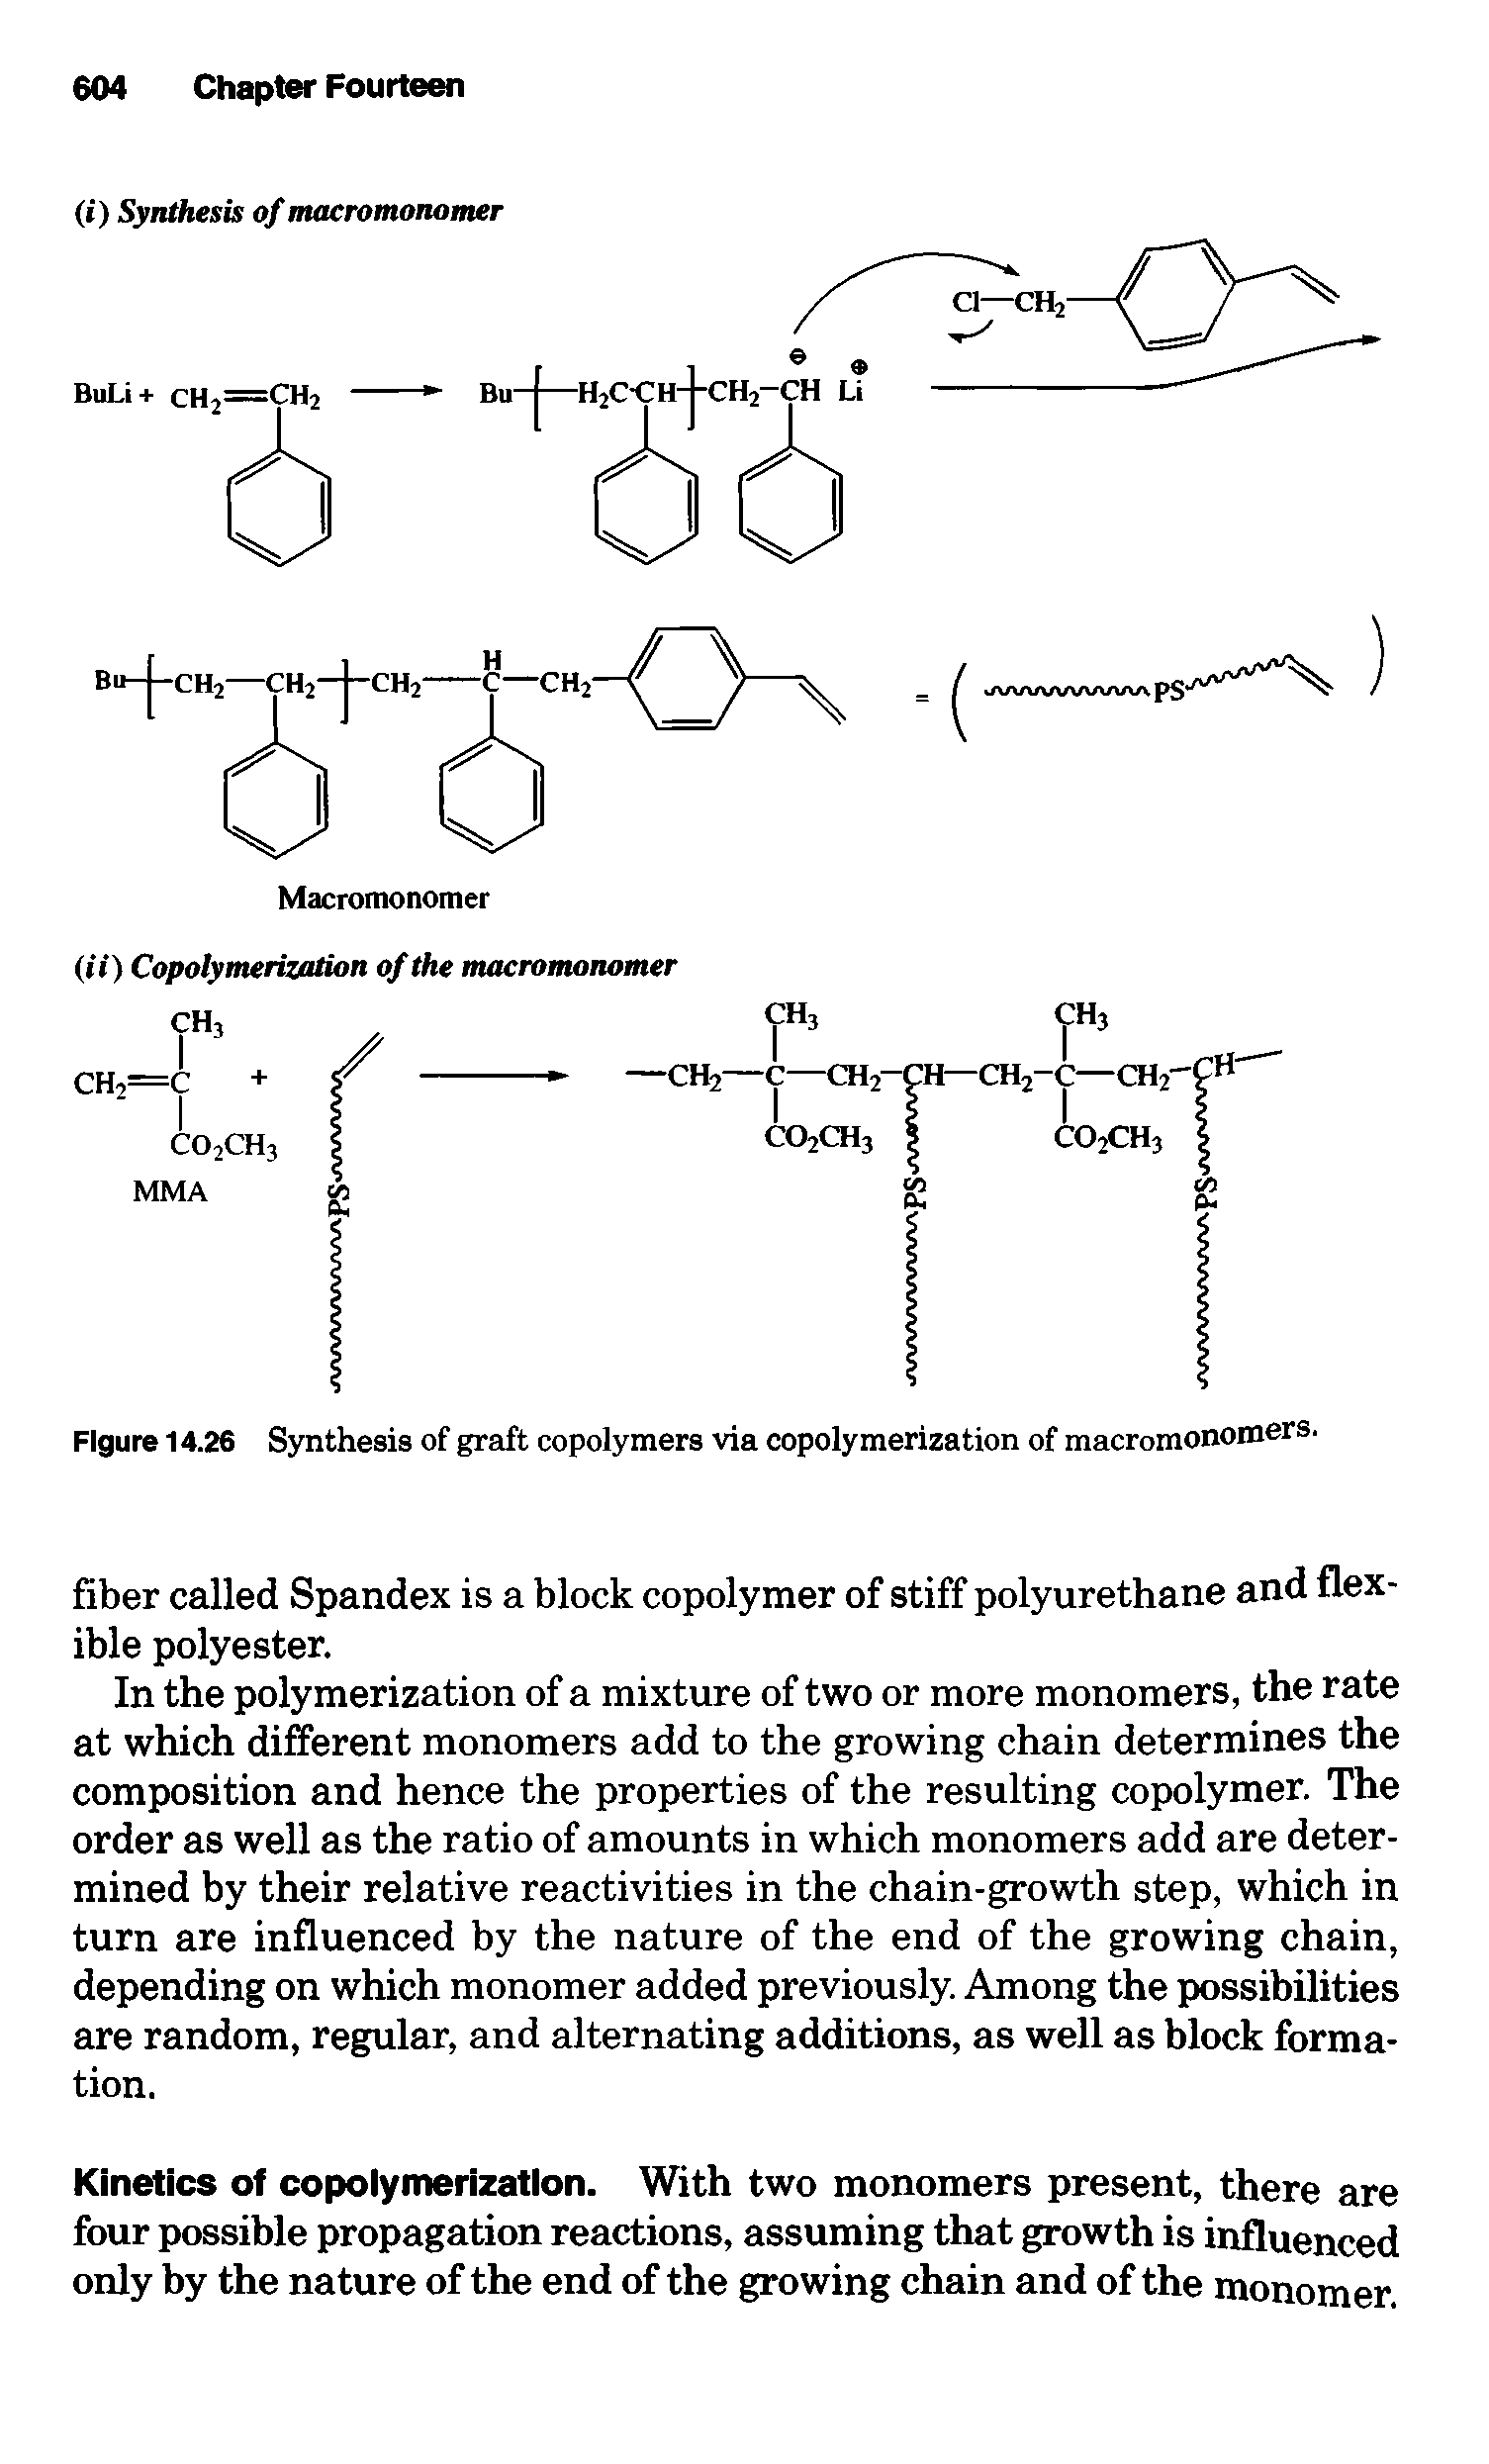 Figure 14.26 Synthesis of graft copolymers via copolymerization of macromonomers.